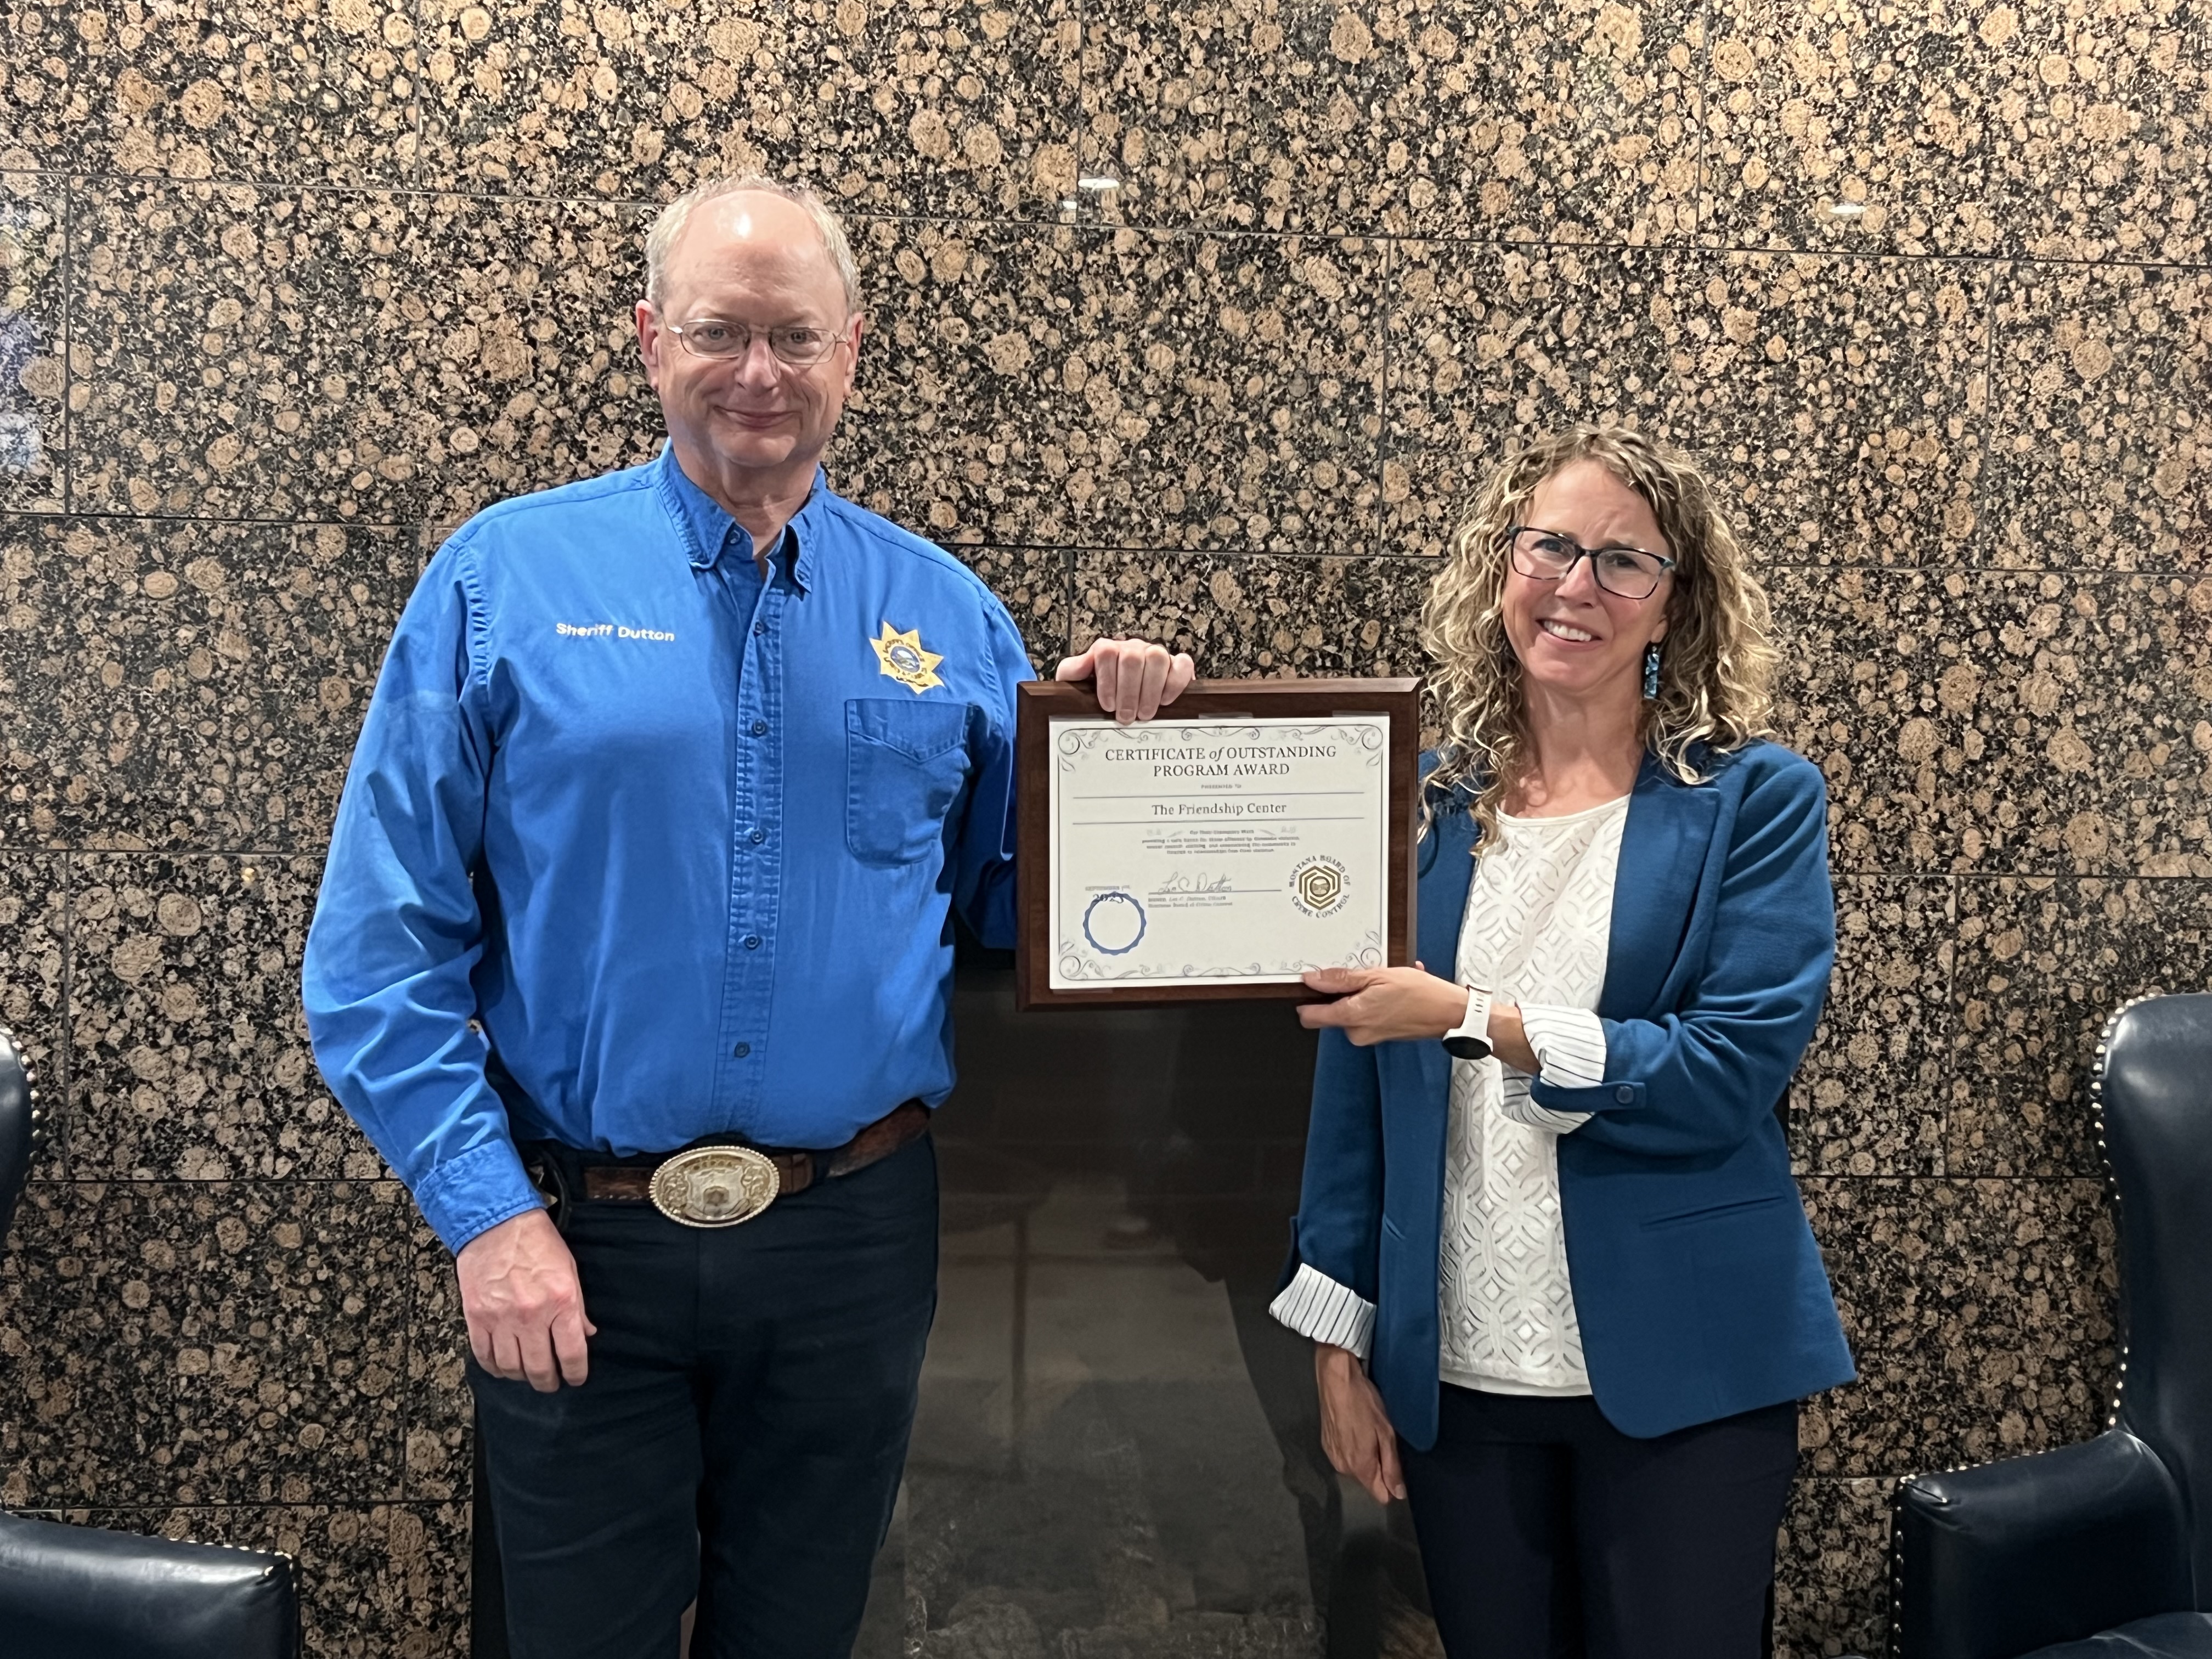 MBCC Chairman Leo Dutton presents Kim Patterson, Development Direct at The Friendship Center, with the Certificate of Outstanding Program Award at the 2023 September Board Meeting at the Calvert Hotel in Lewistown, MT.